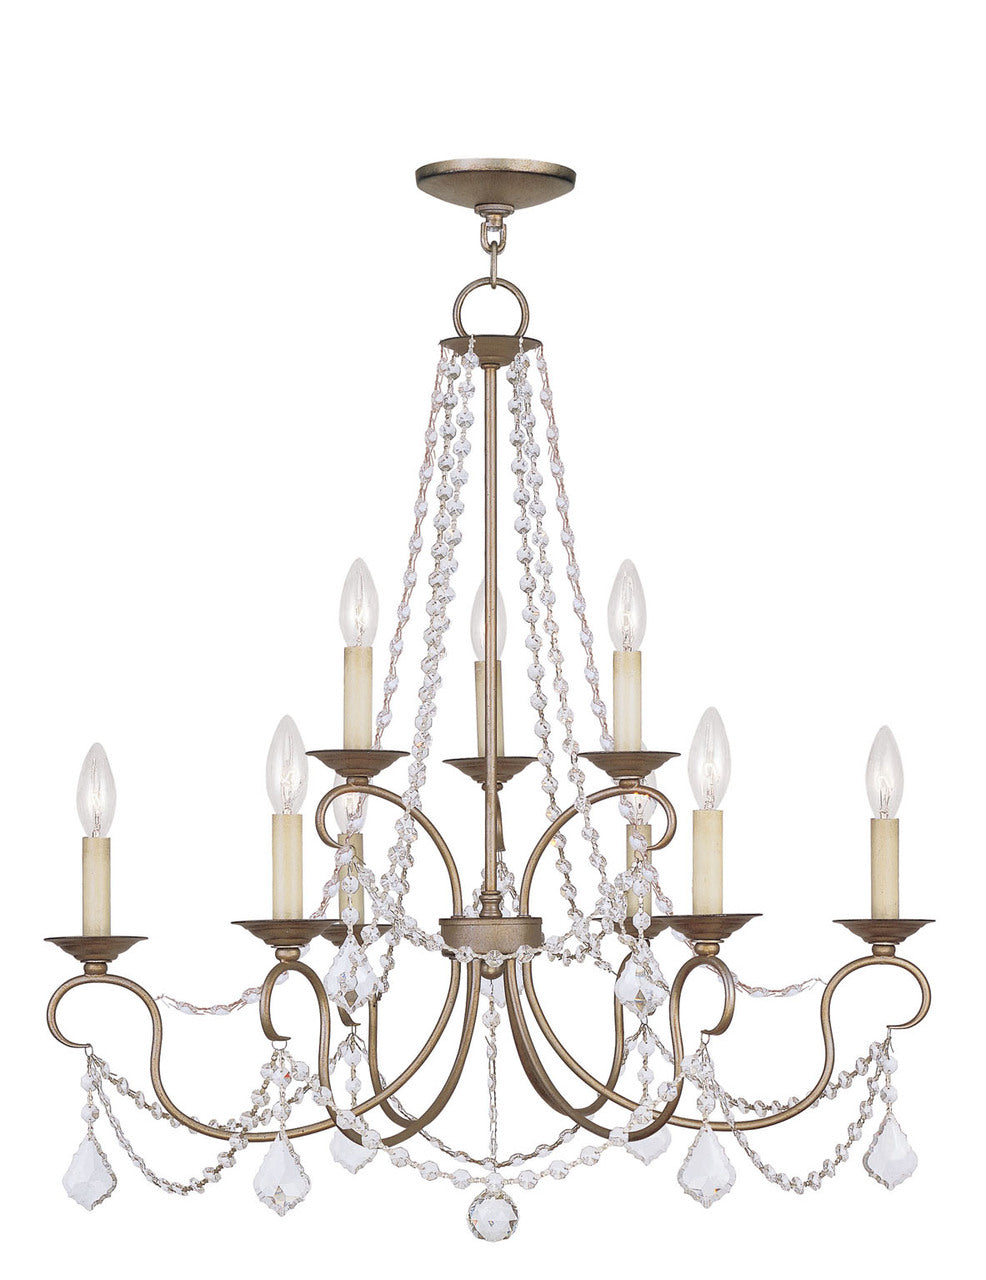 LIVEX Lighting 6519-73 Pennington Chandelier with Hand-Painted Antique Silver Leaves (9 Light)